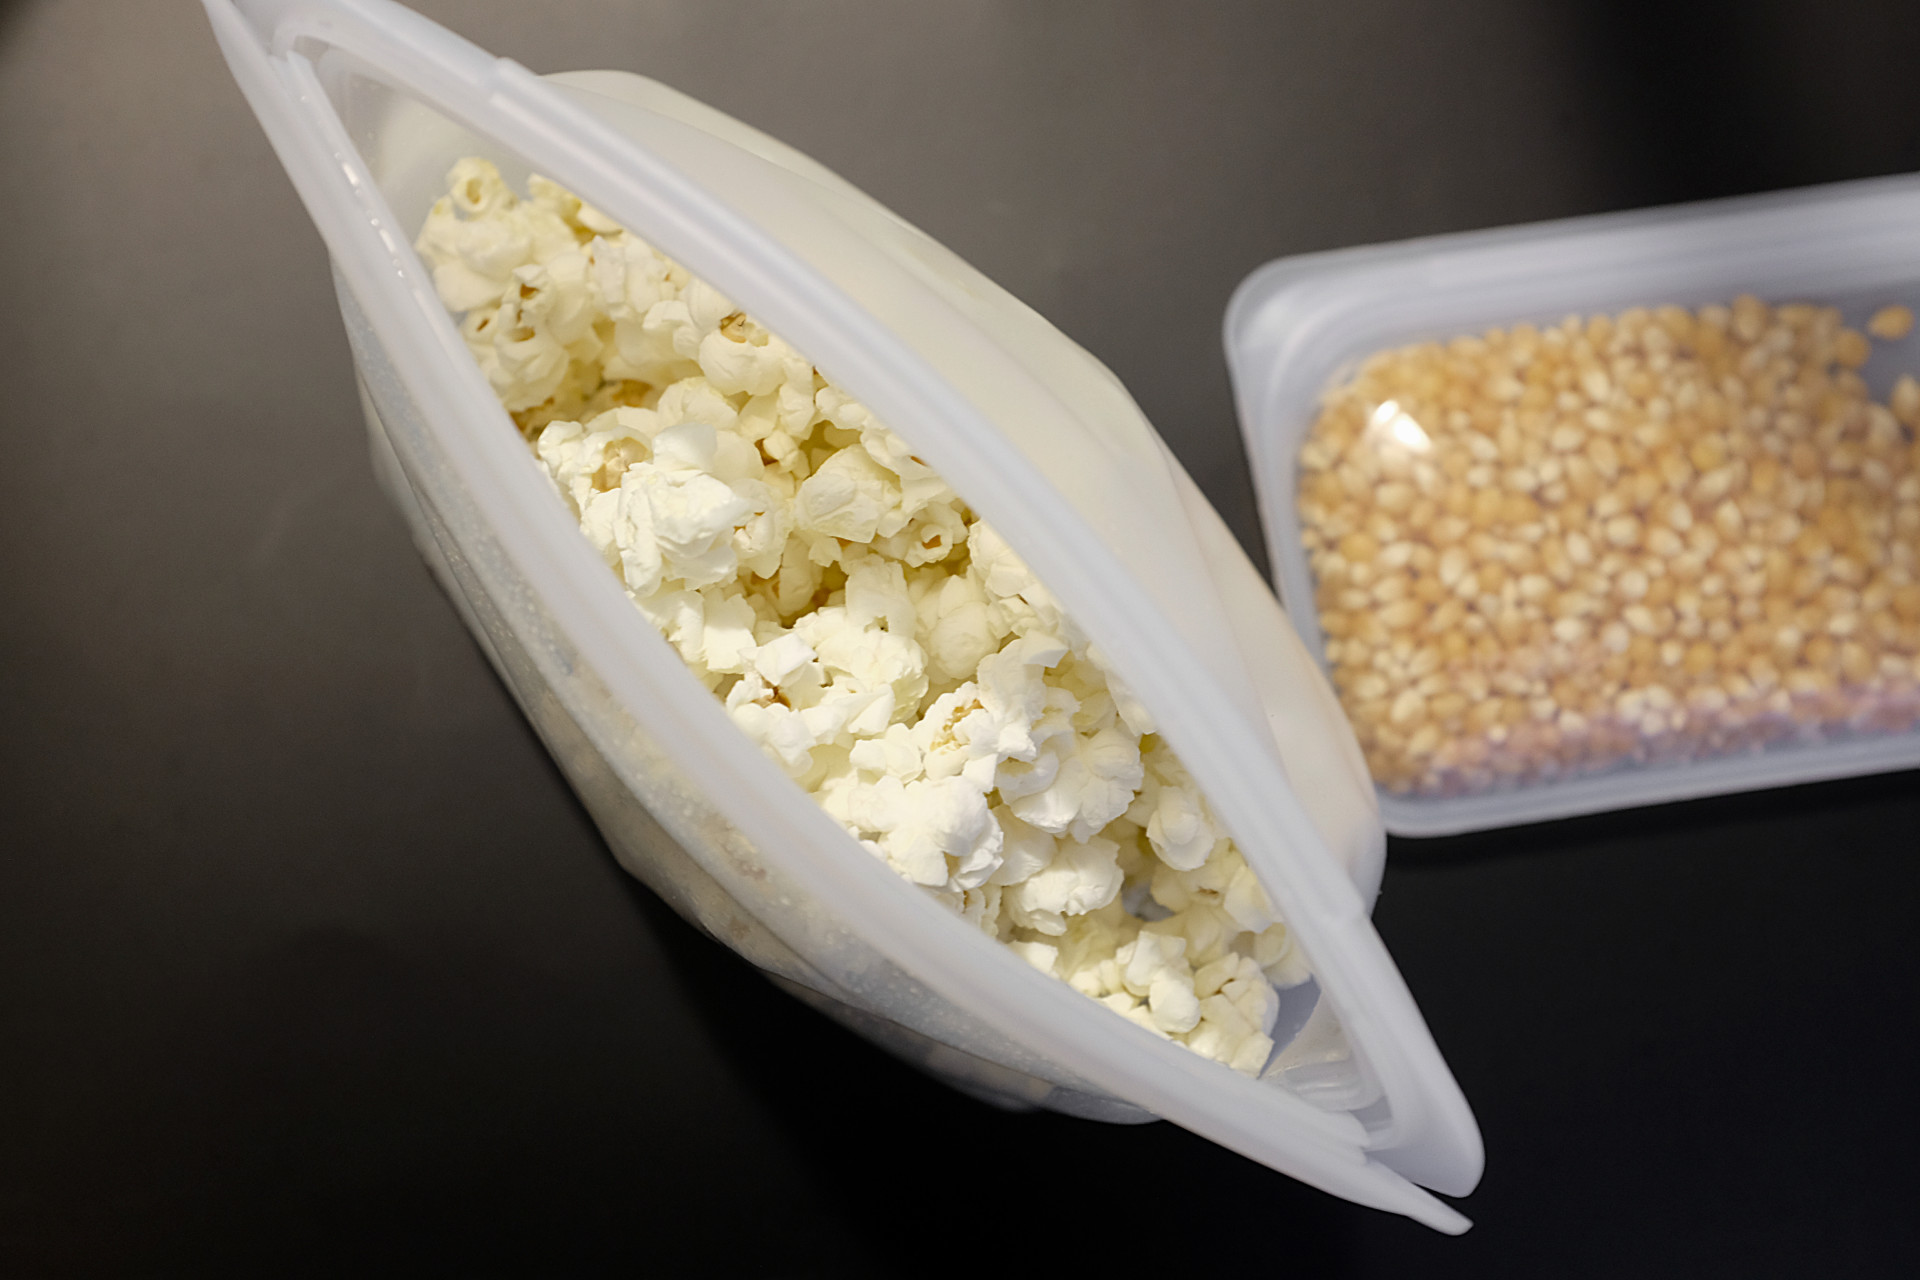 Two Stasher bags on a black surface. The larger one contains popped popcorn, and the smaller one contains unpopped kernels